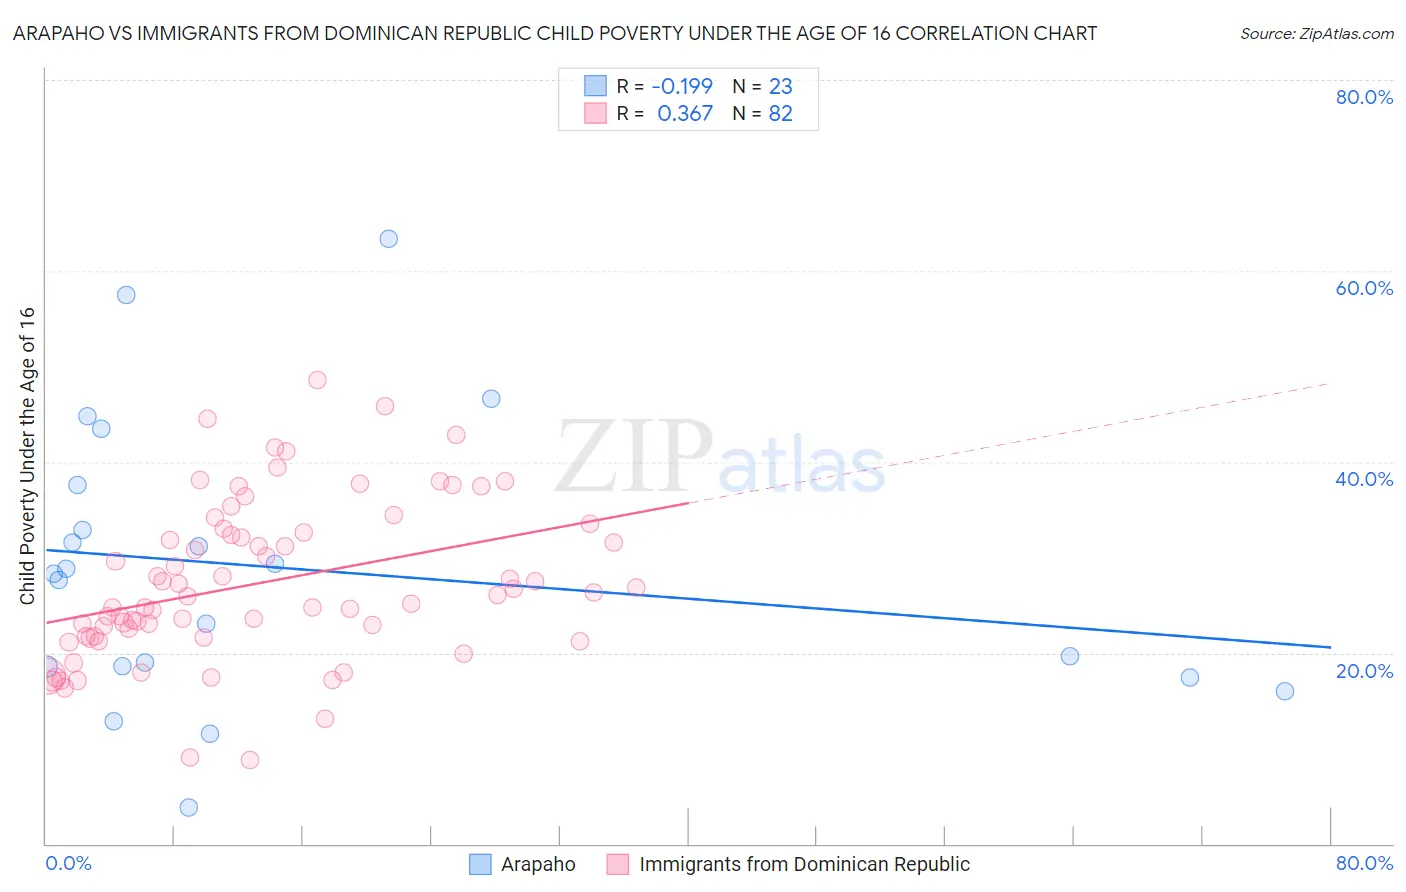 Arapaho vs Immigrants from Dominican Republic Child Poverty Under the Age of 16